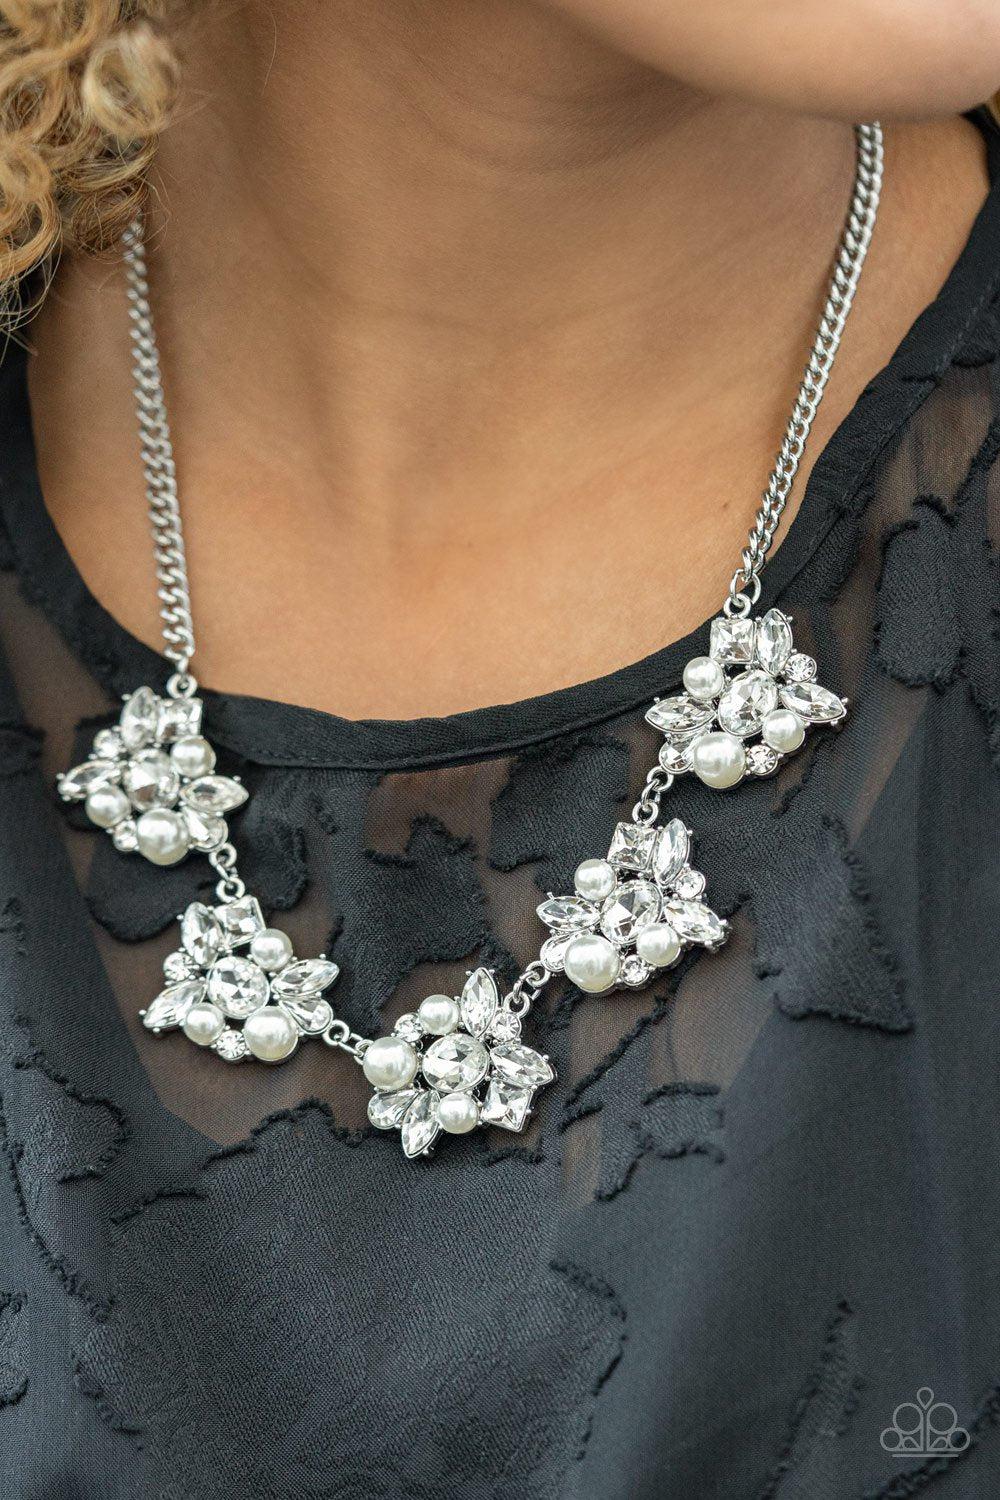 HEIRESS of Them All White Pearl and Rhinestone Necklace - Paparazzi Accessories 2021 EMP Exclusive - model -CarasShop.com - $5 Jewelry by Cara Jewels